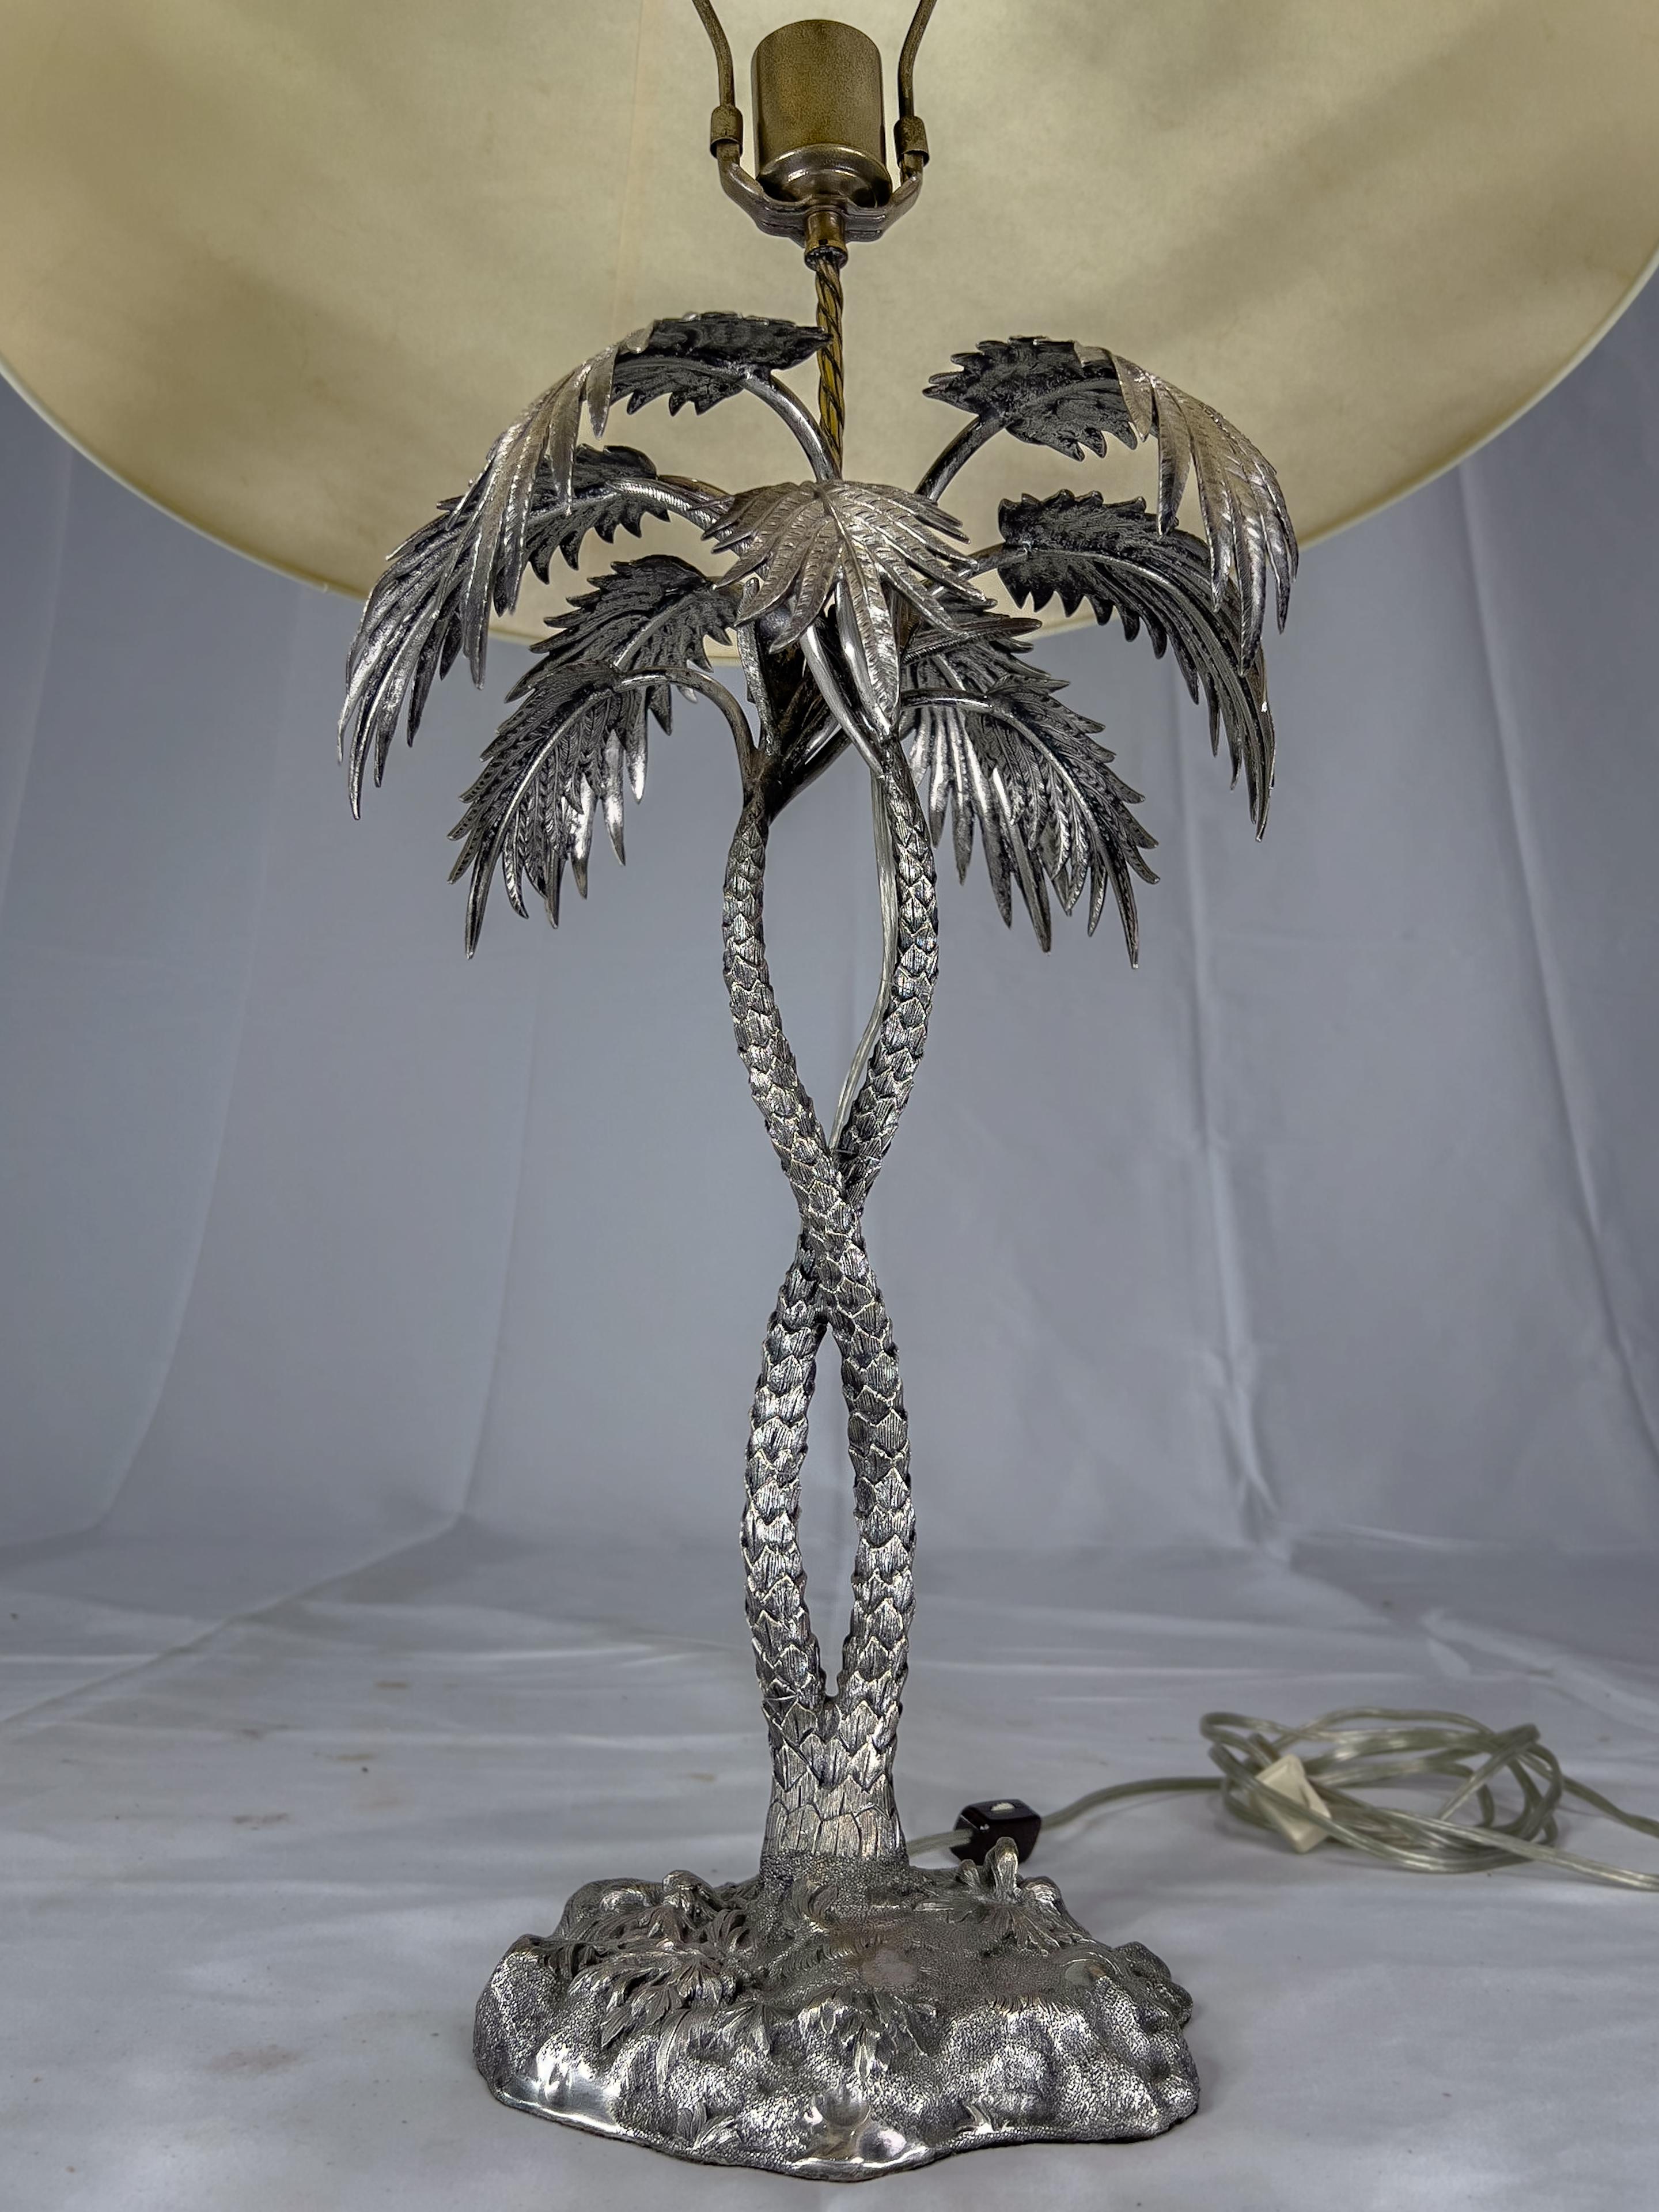 19th c. Sheffield silver plate in the form of a palm tree on a rocky mound made into a lamp.